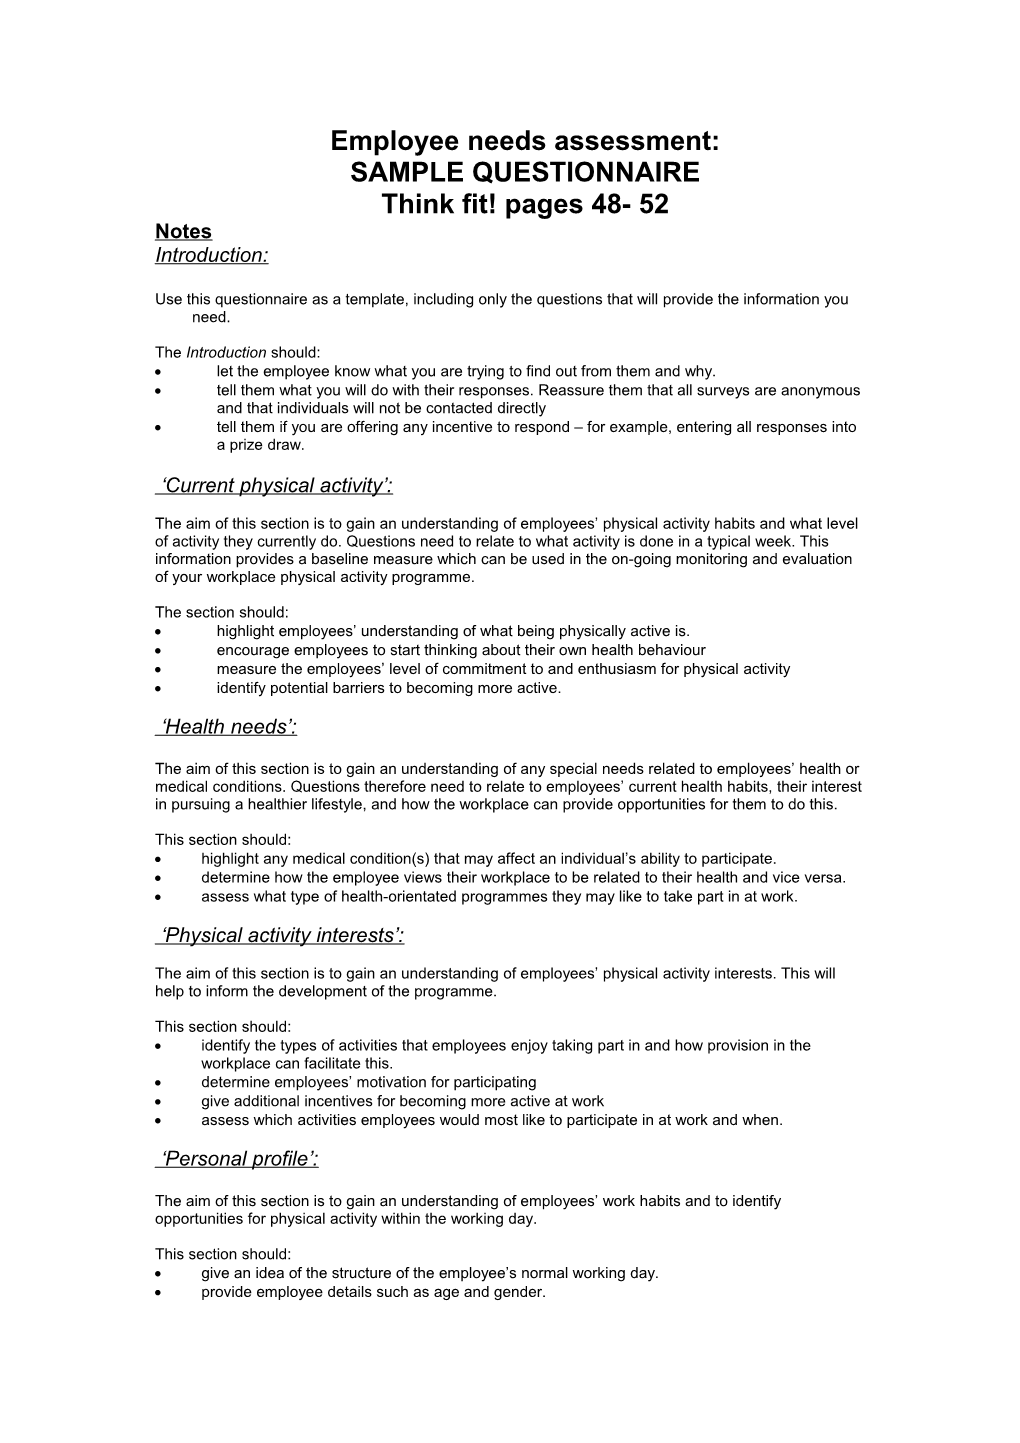 Employee Needs Assessment: SAMPLE QUESTIONNAIRE Page 46